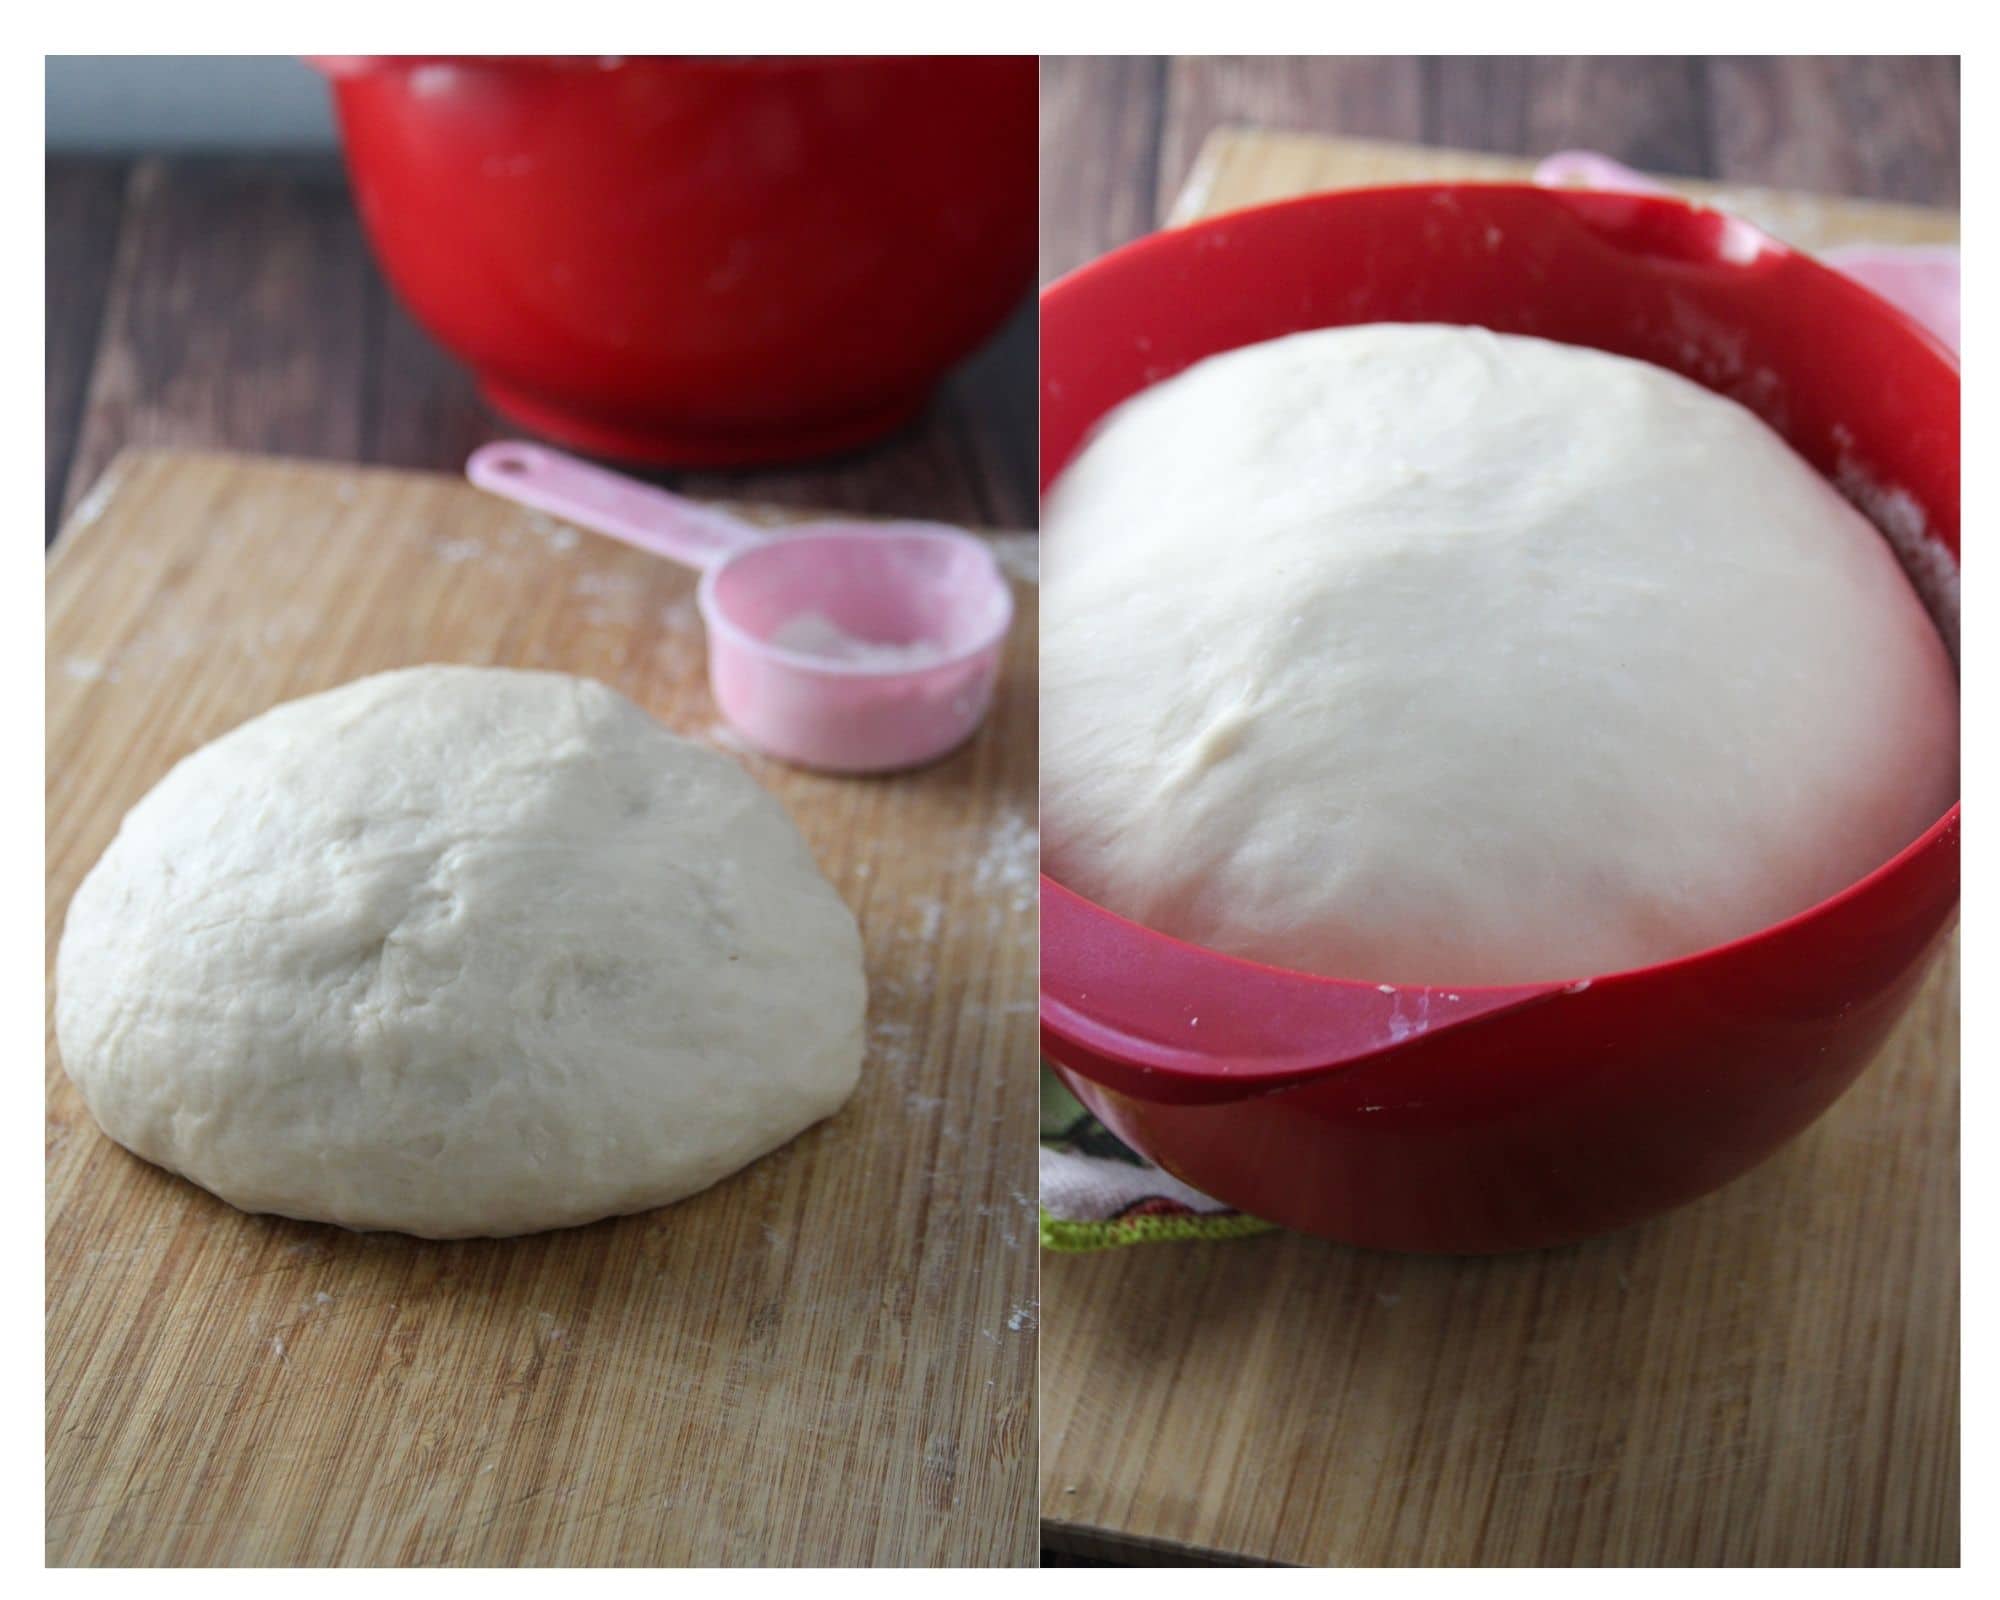 The dough of cheese roll before and after the first rise.